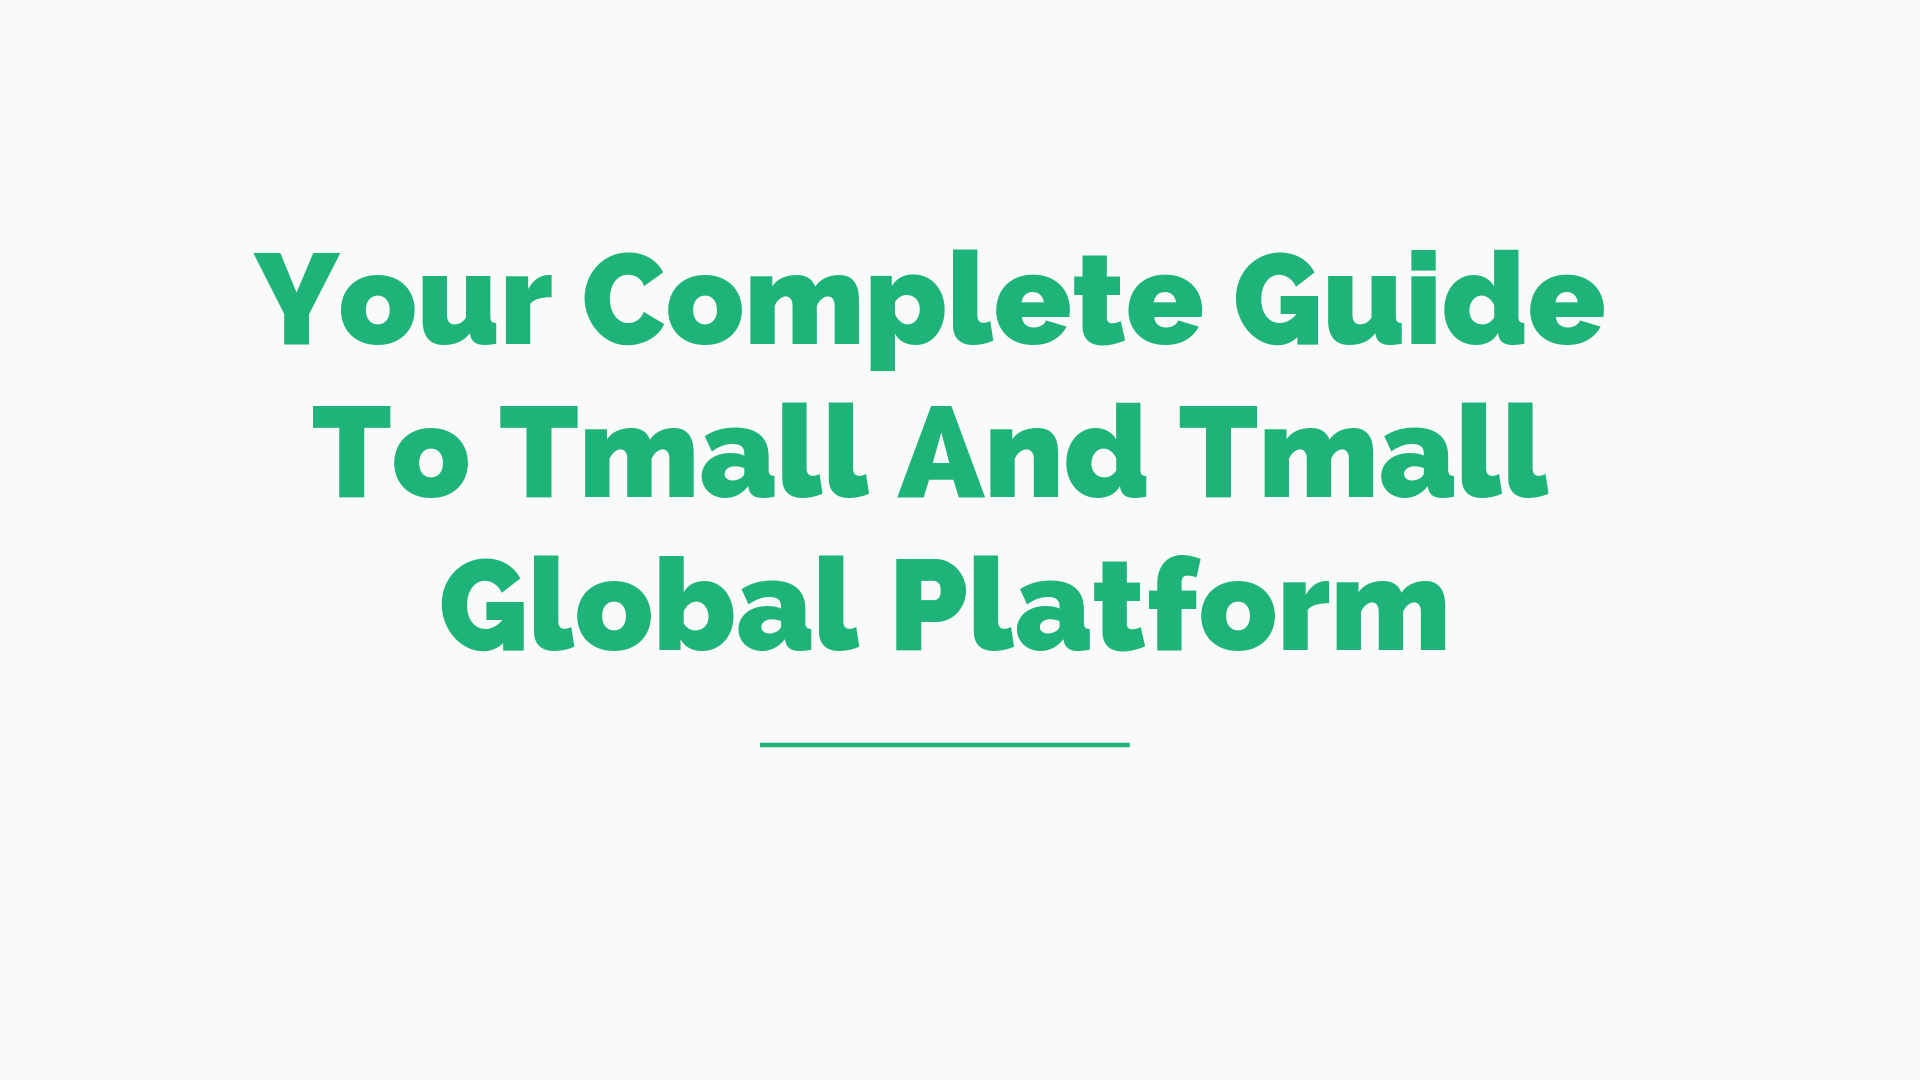 Your Complete Guide To Tmall And Tmall Global Platform